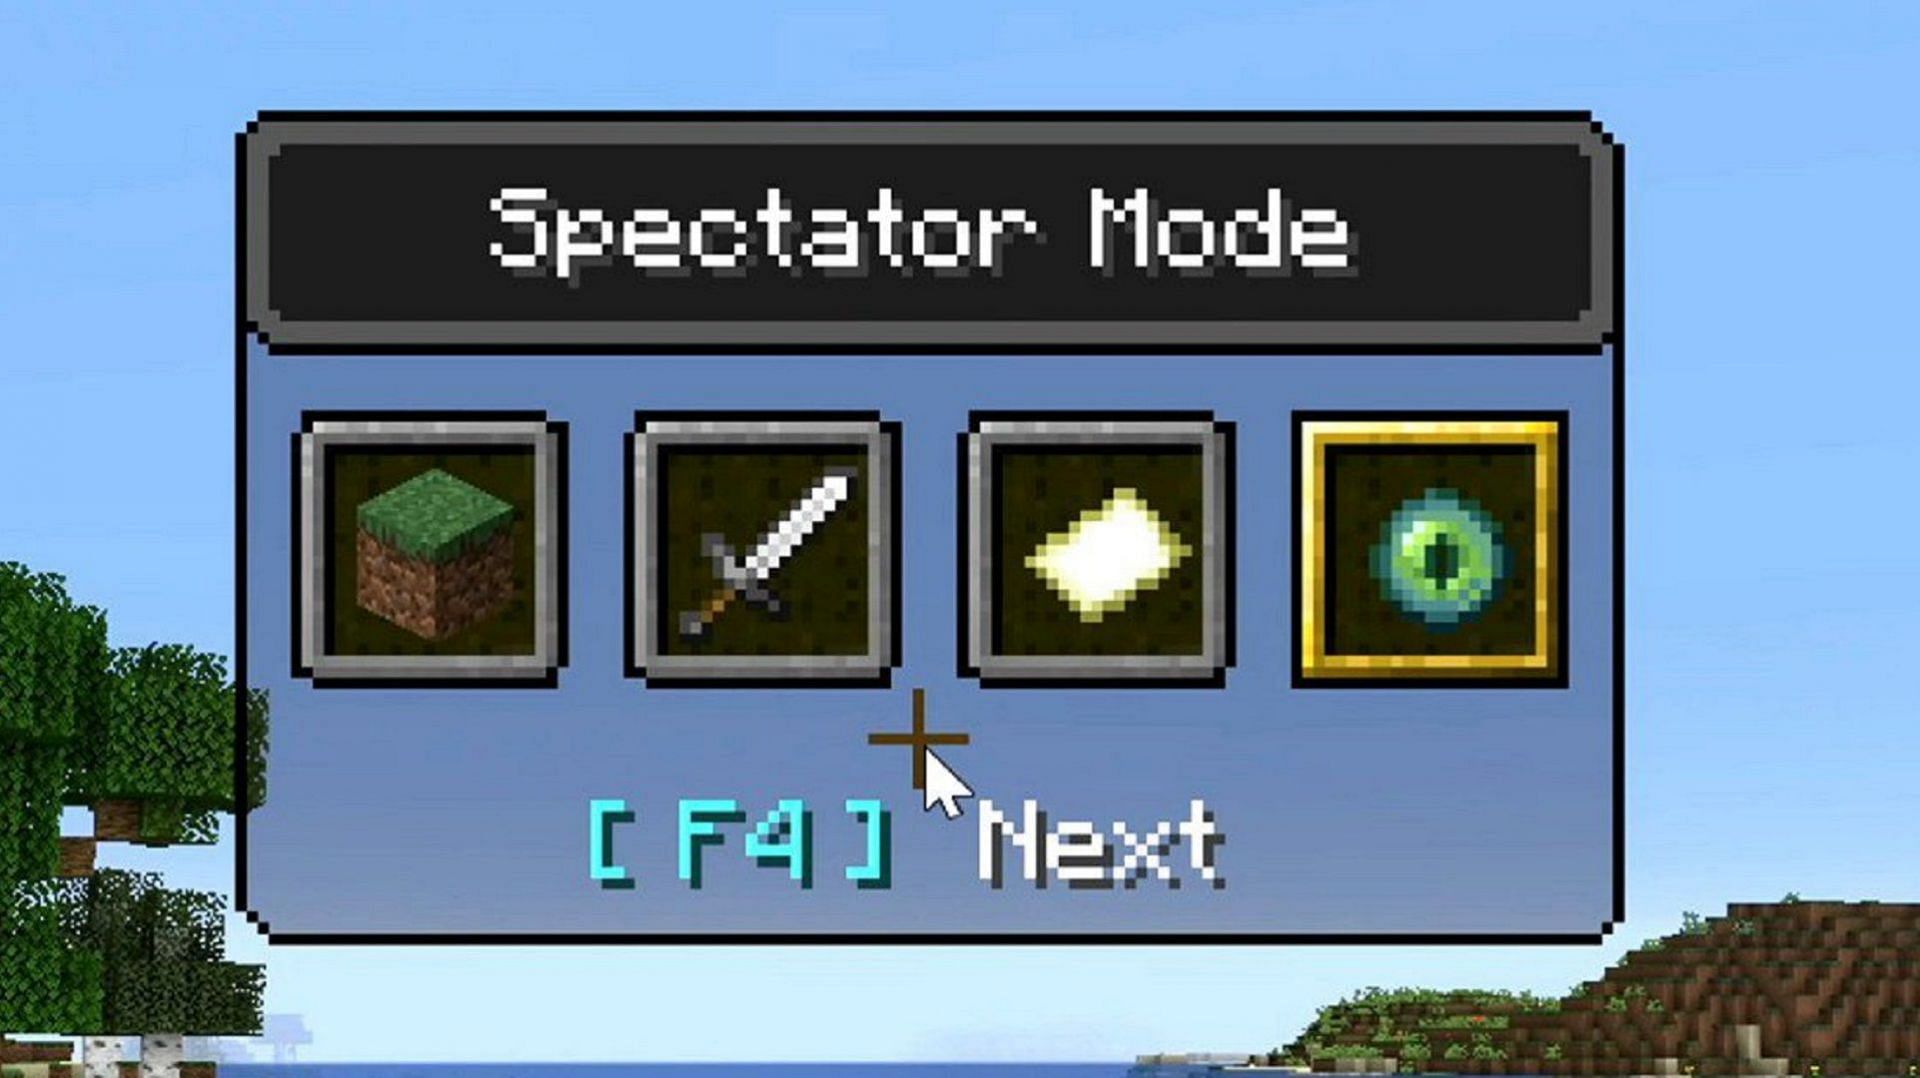 A game switching menu has been added, but is rarely mentioned in Minecraft 1.16 (Image via Mojang)